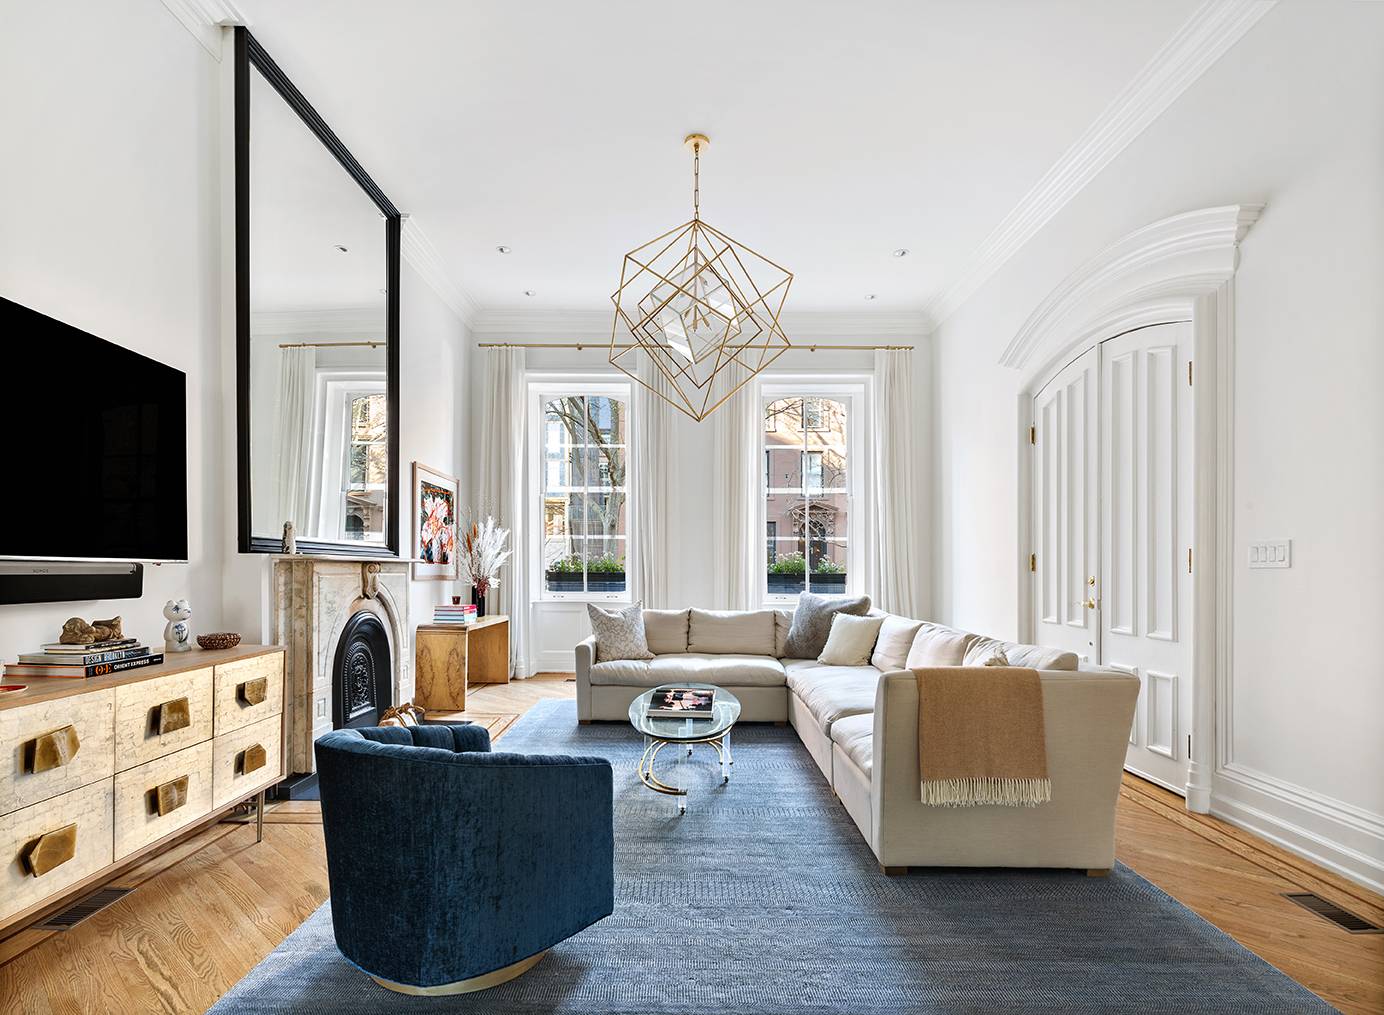 122 Amity is a rare 26 x 100 brownstone condominium located in the heart of Cobble Hill s historic district.